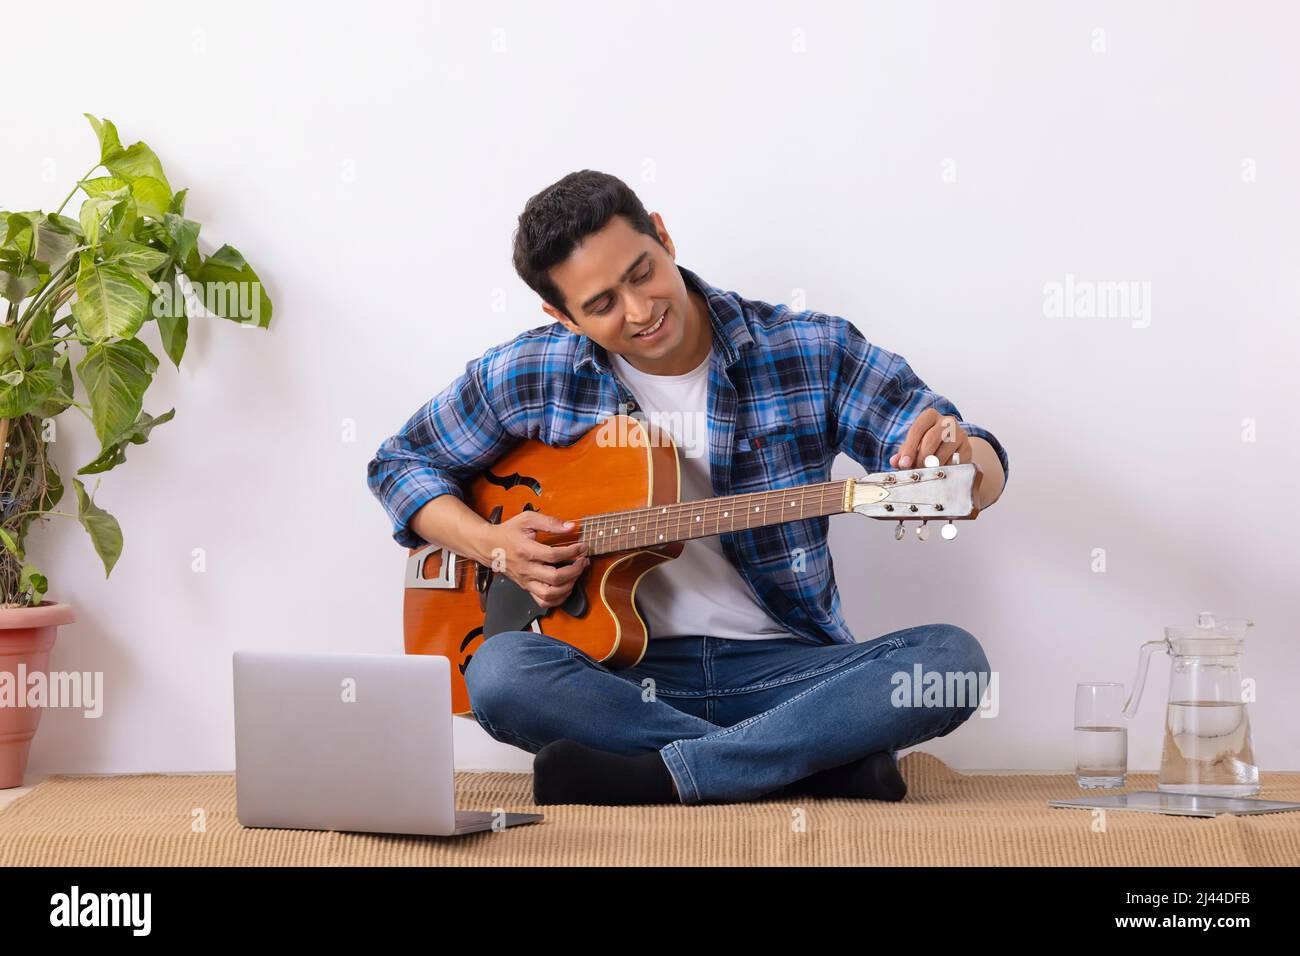 Young music teacher tuning guitar during online class in living room Stock Photo